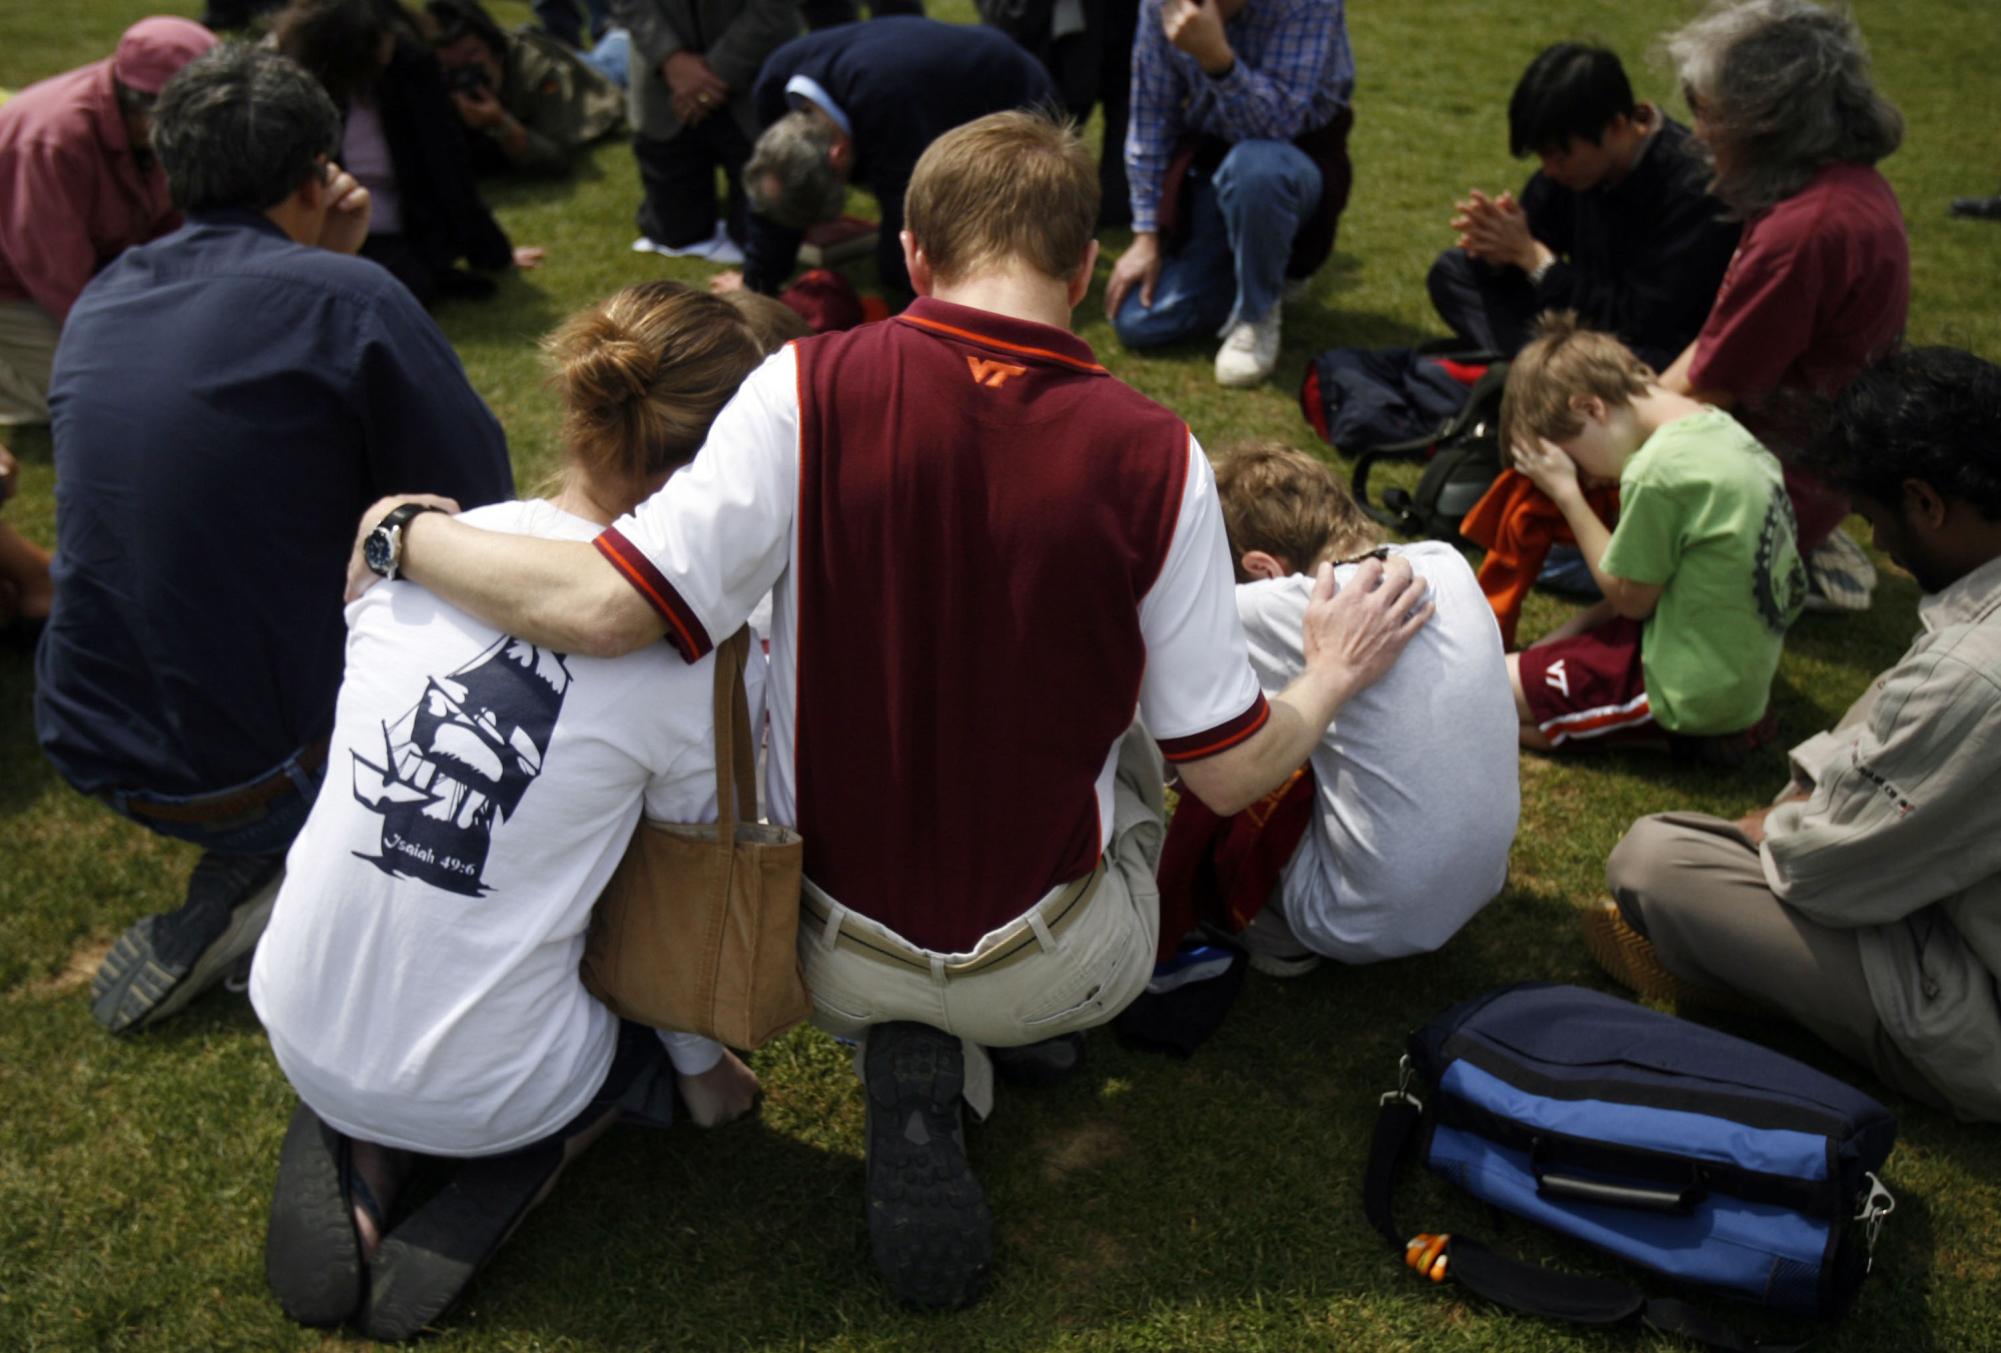 Families and students join in prayer at Virginia Techs Drill Field, Wednesday, April 18, 2007, near where more than 30 people were killed in a shooting rampage at the Blacksburg, Virginia campus on two days prior.